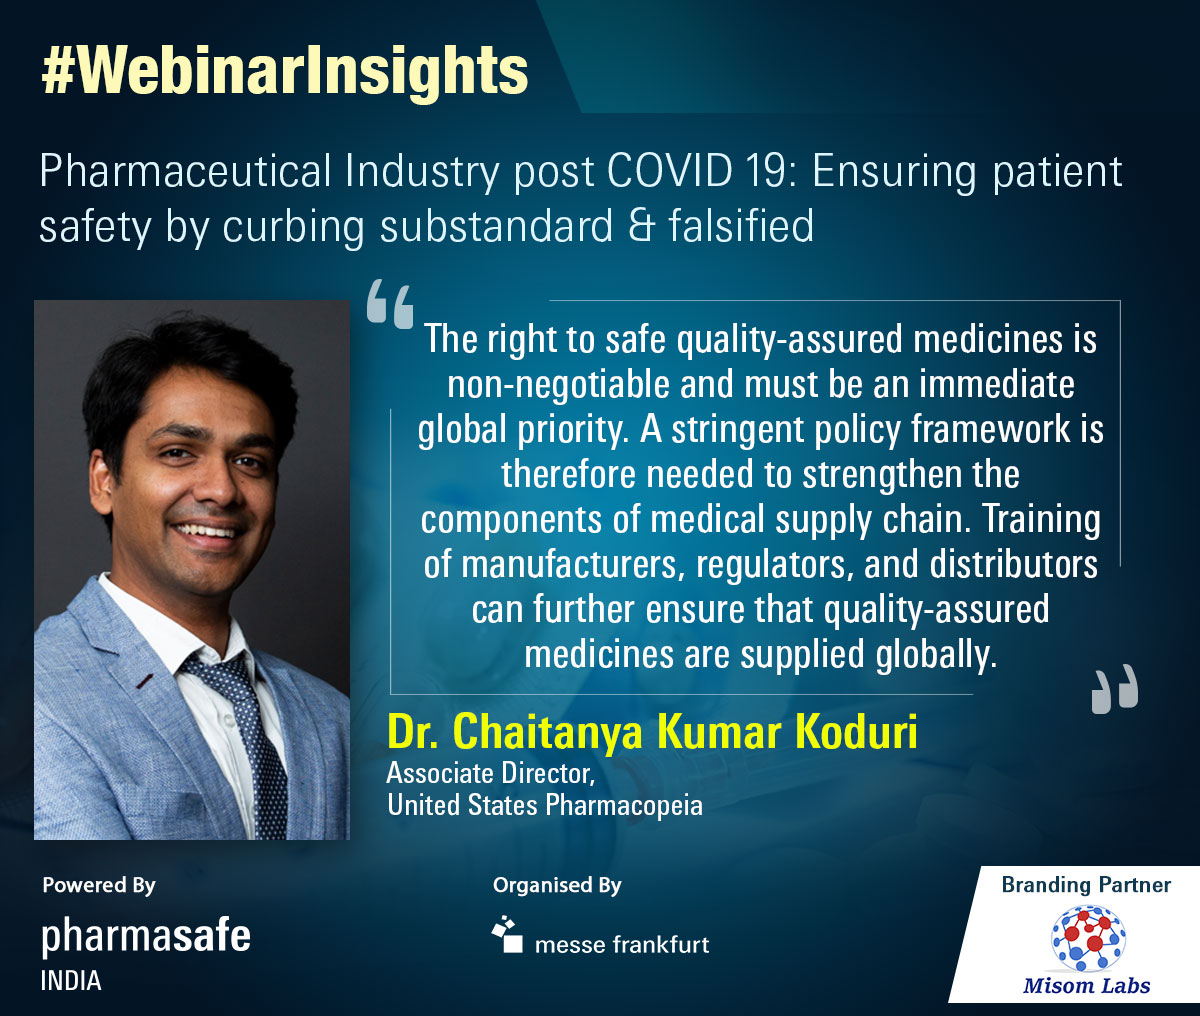 #WebinarInsights

Panelist from the recent #PharmasafeIndia webinar, Dr Chaitanya Kumar Koduri, Associate Director, @USPharmacopeia spoke about the need for strengthening medical supply chain and ensuring access to quality assured medicines on a global scale.